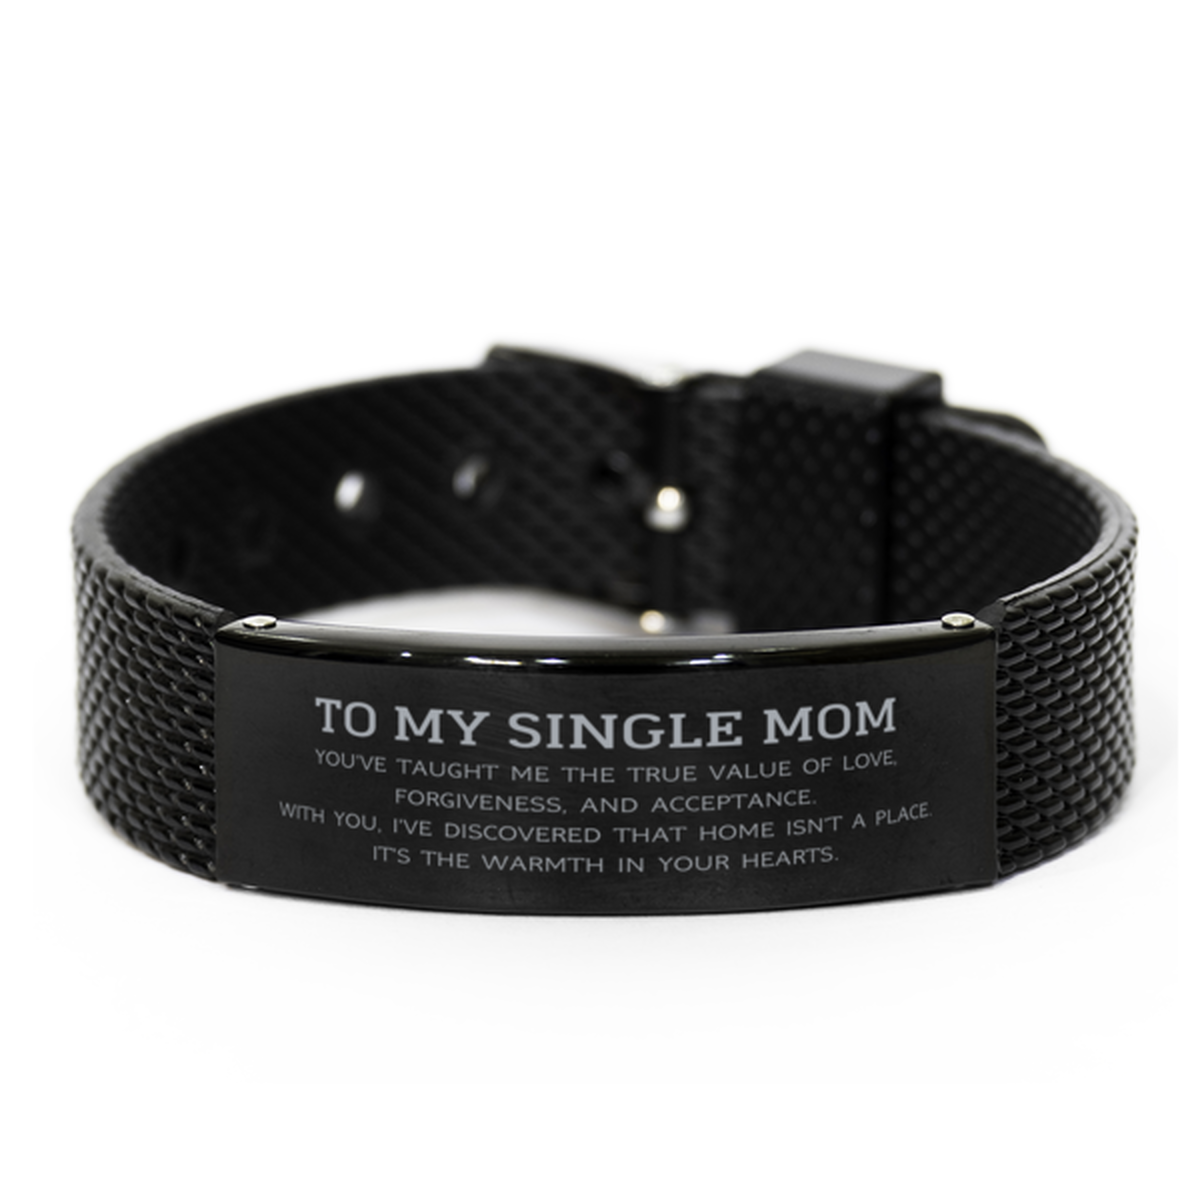 To My Single Mom Gifts, You've taught me the true value of love, Thank You Gifts For Single Mom, Birthday Black Shark Mesh Bracelet For Single Mom